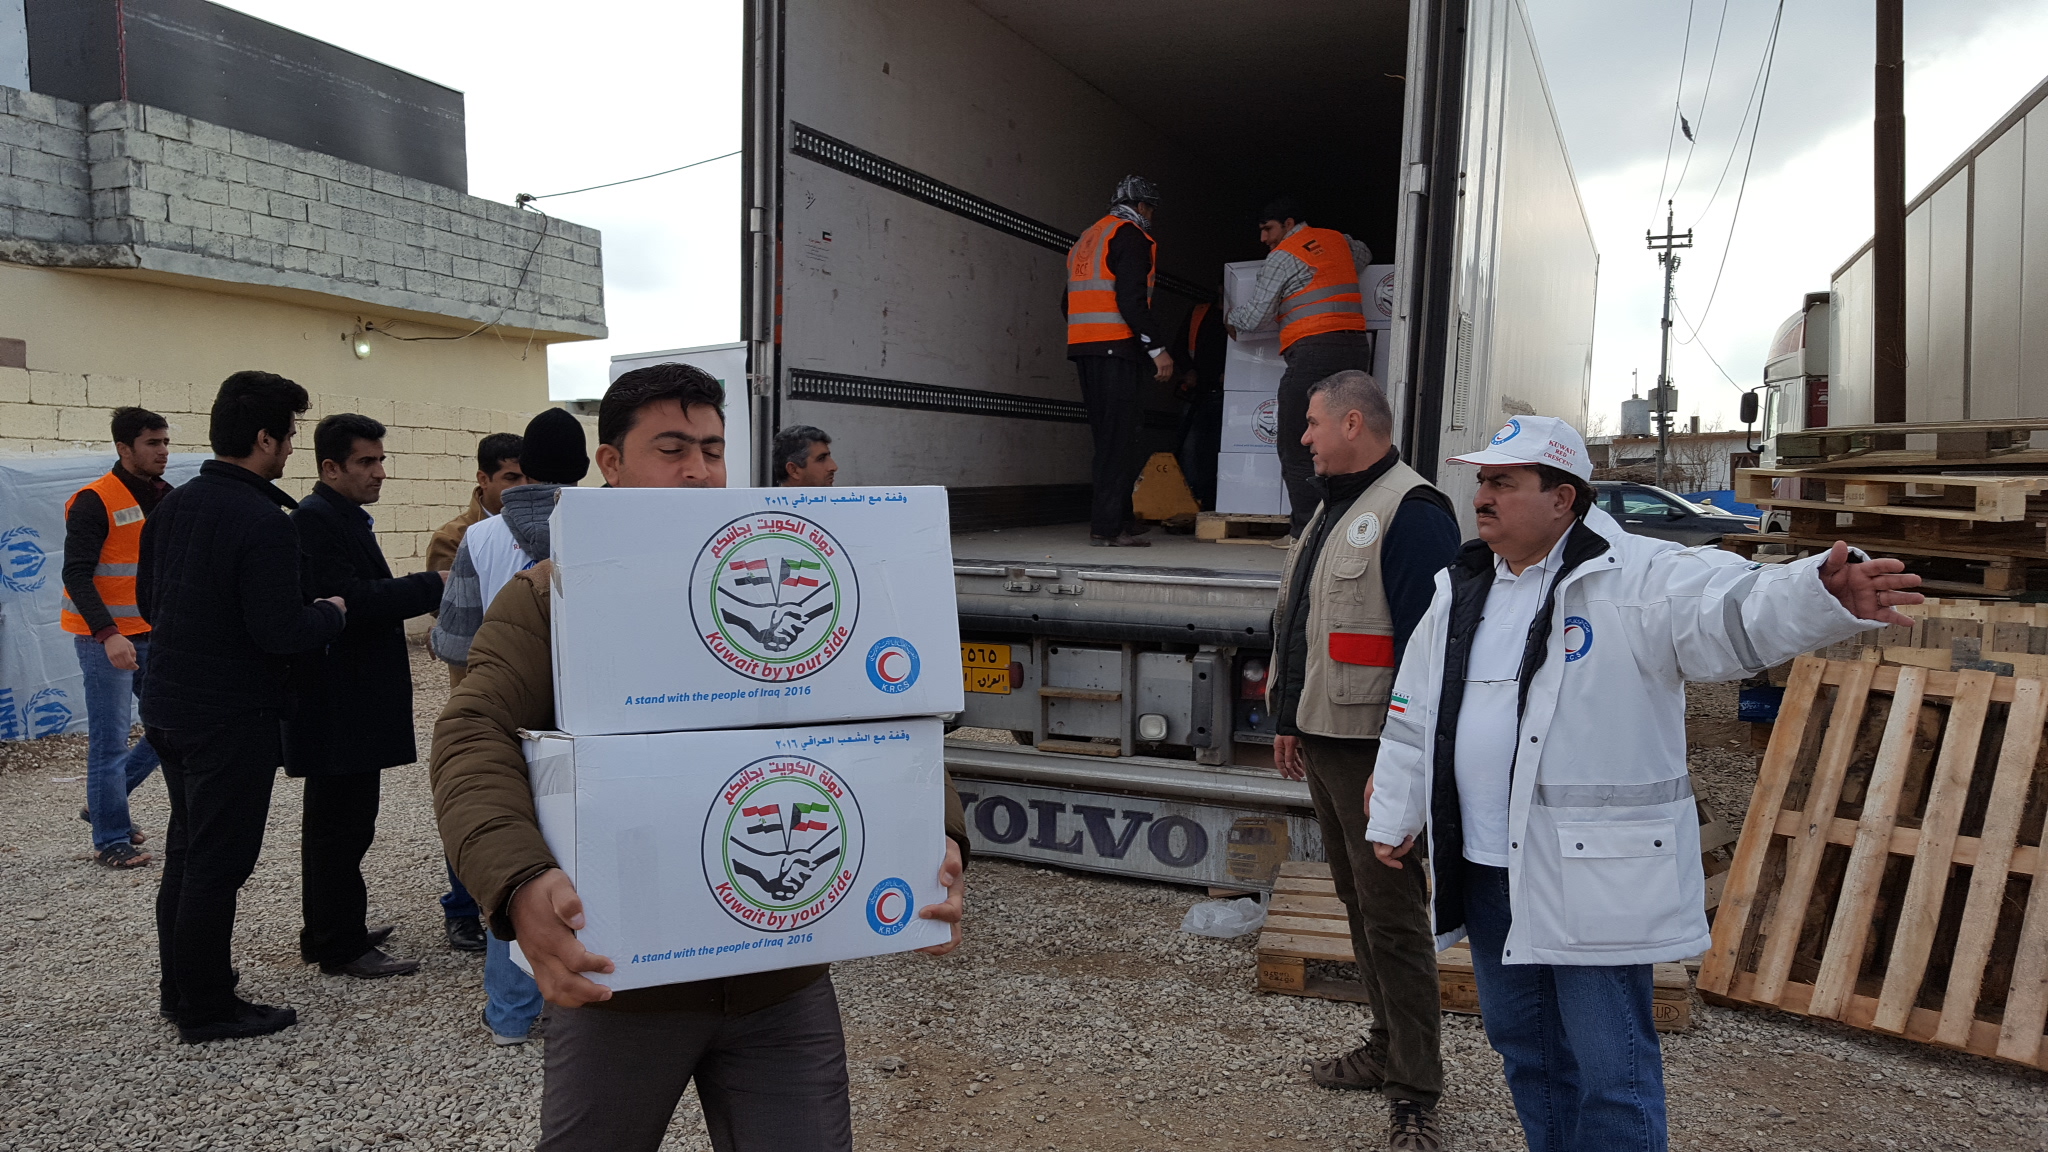 Kuwait Red Crescent Society offered 860 food packages to displaced Iraqis from Mosul